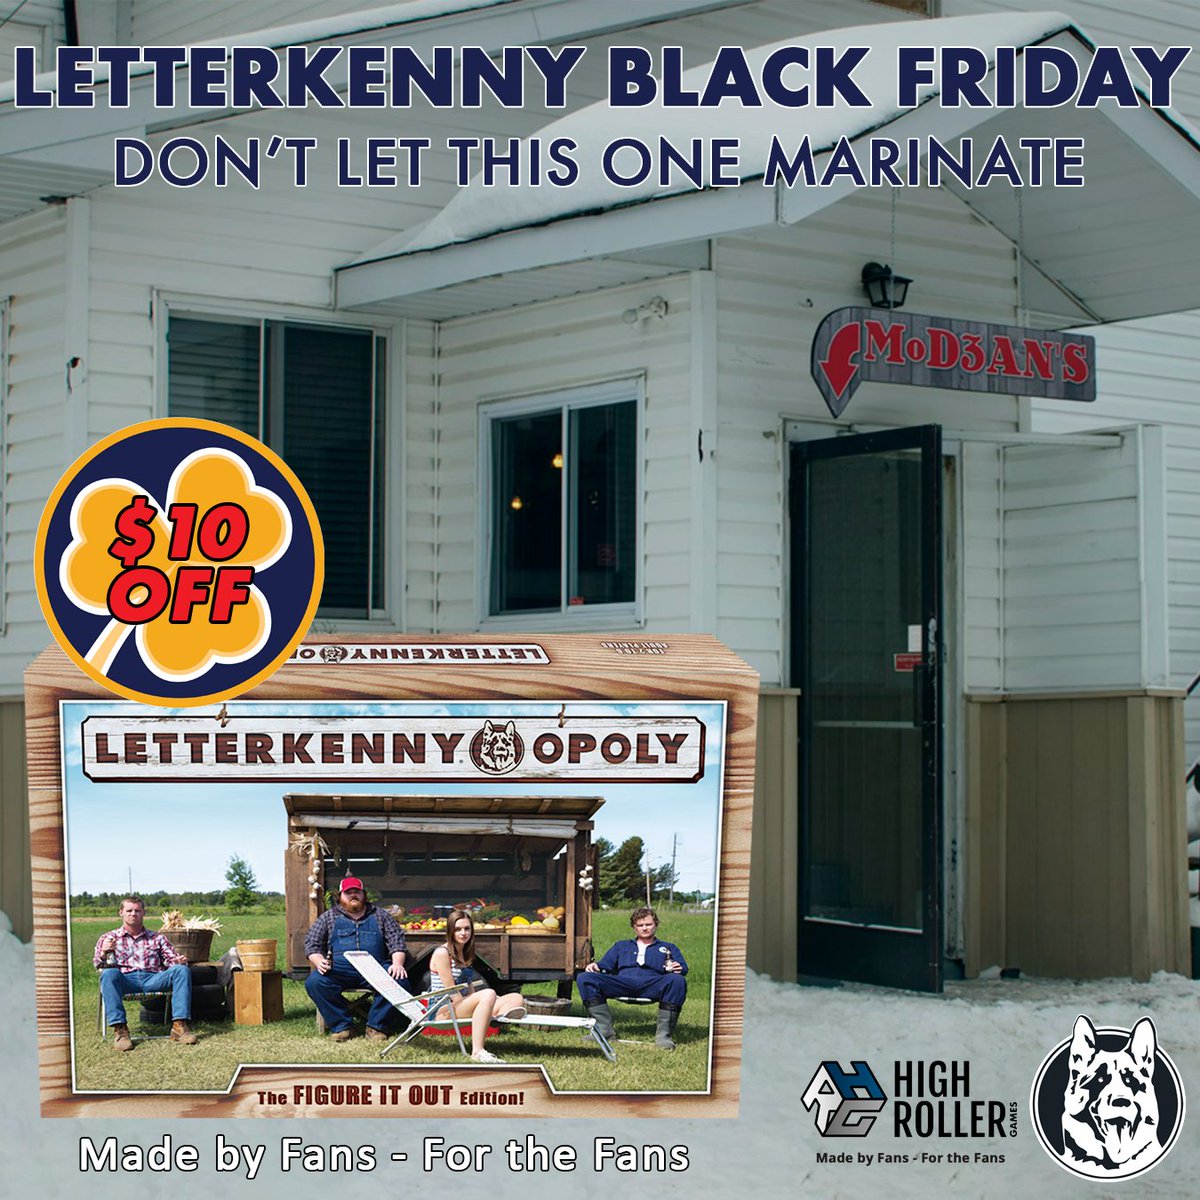 It's Black Friday and you know what that means! Sales! This weekend get $10 off Letterkenny Opoly! Pitter Patter! highrollergames.com/products/lette… #HighRollerGames #Letterkenny #BlackFriday